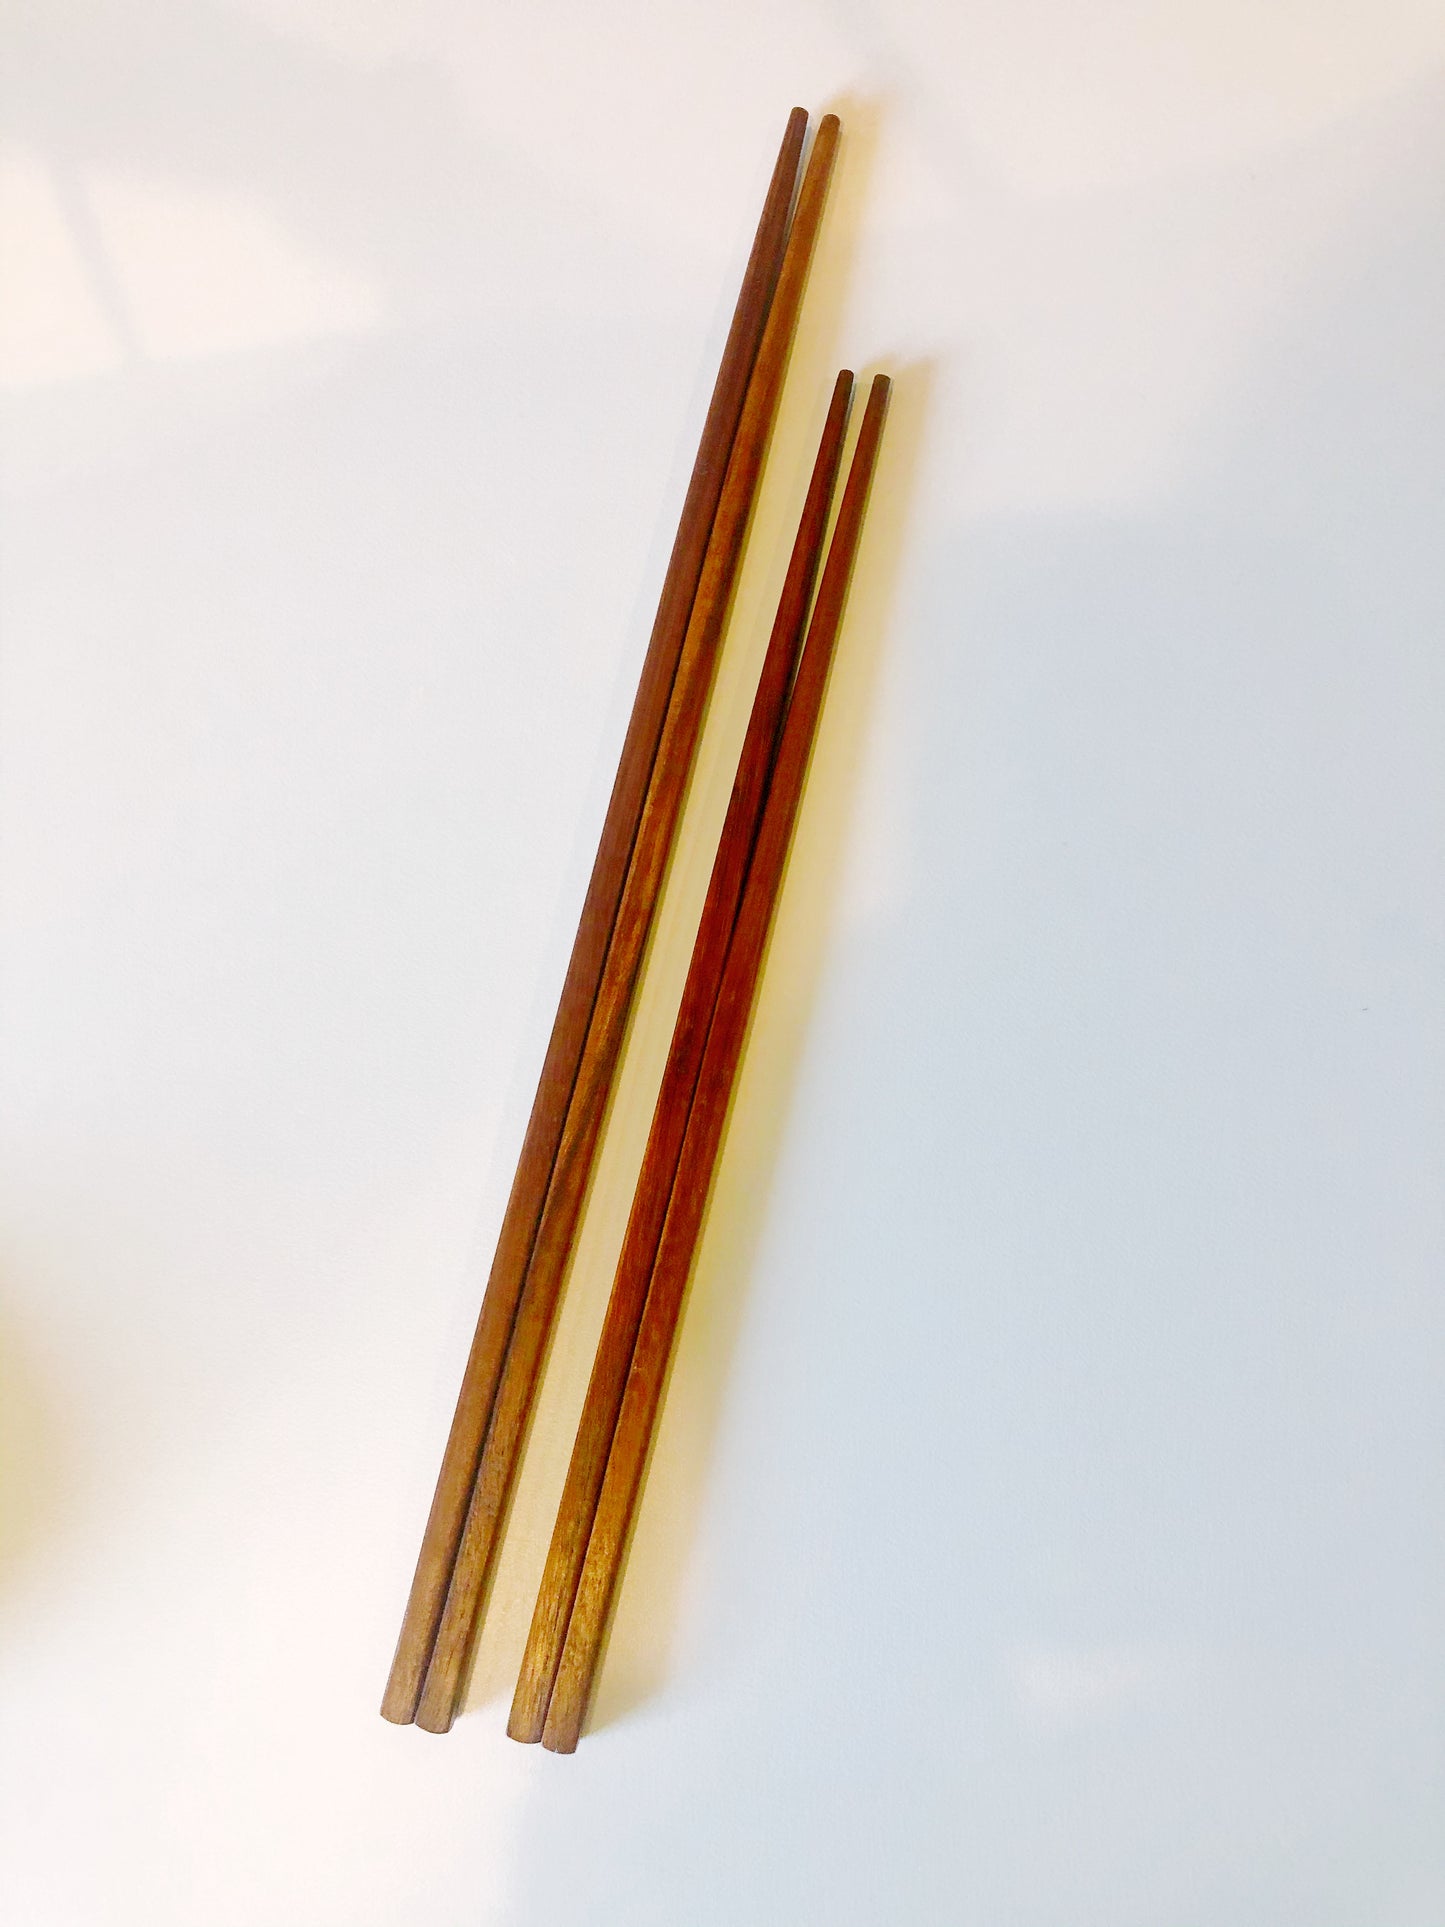 SIMPO 12" Cooking/ Hotpot Chopsticks-(100% Tung oil finish)-Natural Wood Chopsticks-Made In Canada